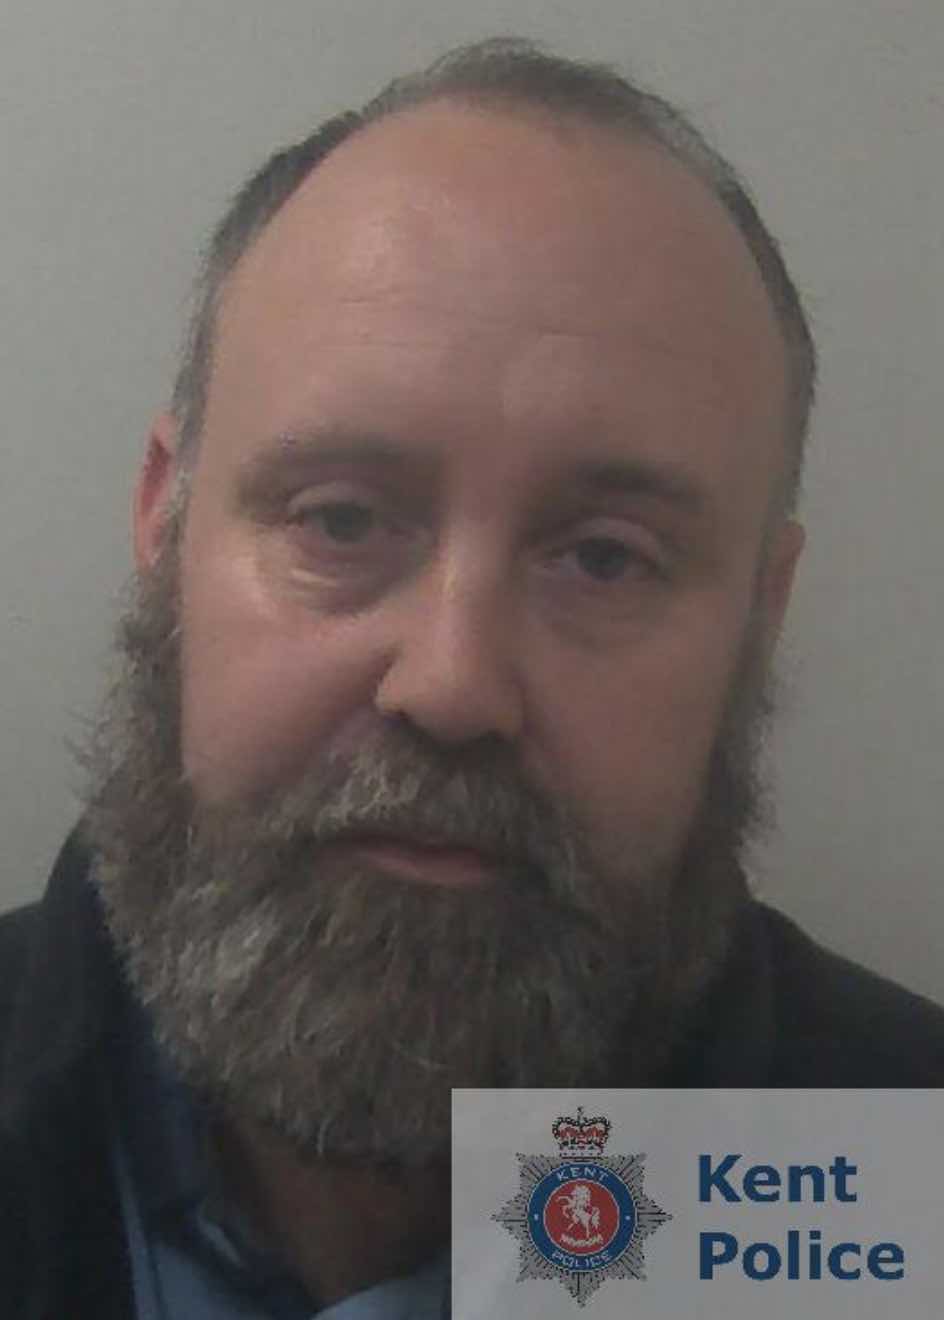 Martin Selman From Maidstone Is Wanted In Connection With Sexual Offences